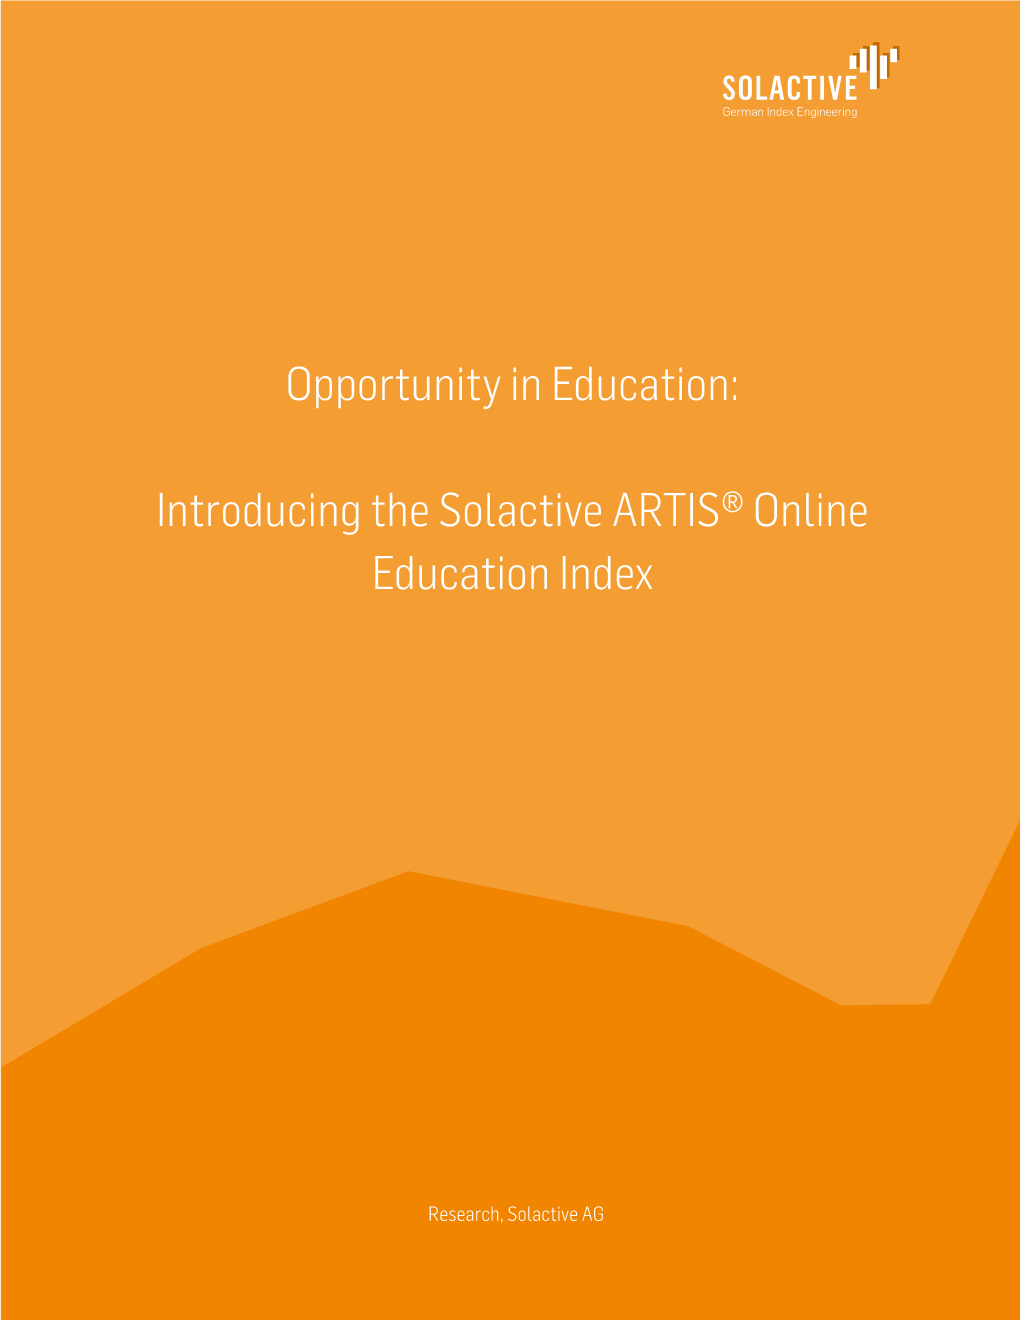 Opportunity in Education: Introducing the Solactive ARTIS® Online Education Index